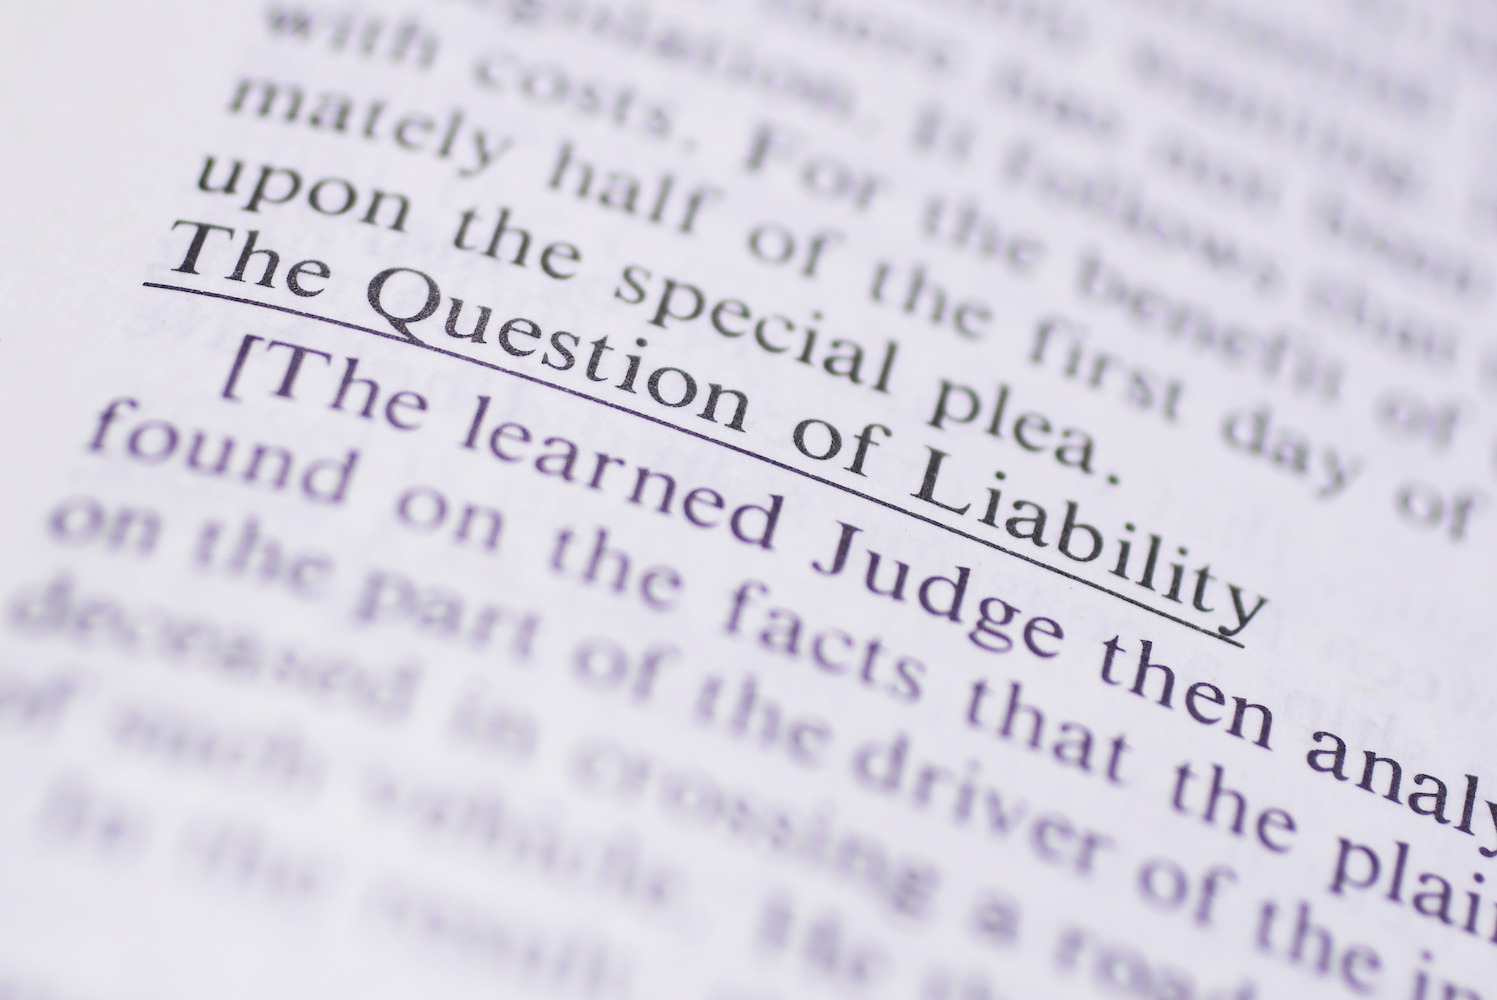 First Time Executor. A close up image in a reference manual of the text and term "The Question of Liability". Black lettering on a white paper page.